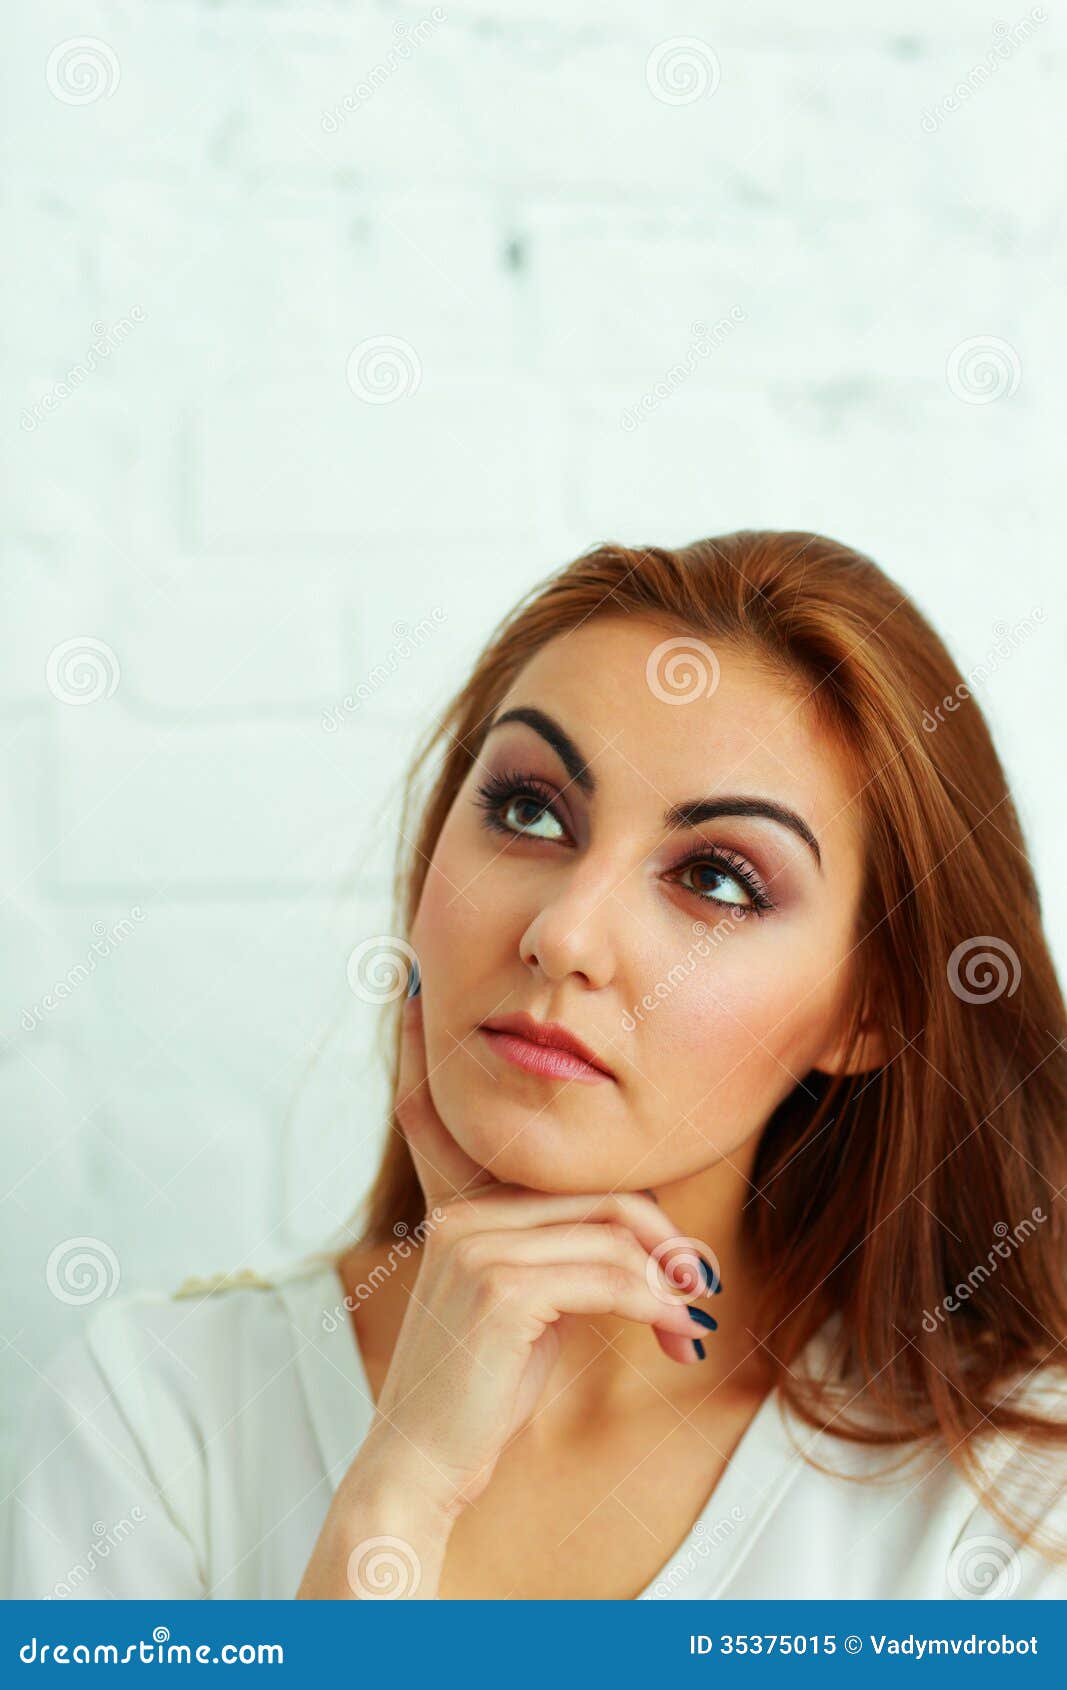 Portrait Of A Thoughtful Woman Looking Up Stock Image Image Of 